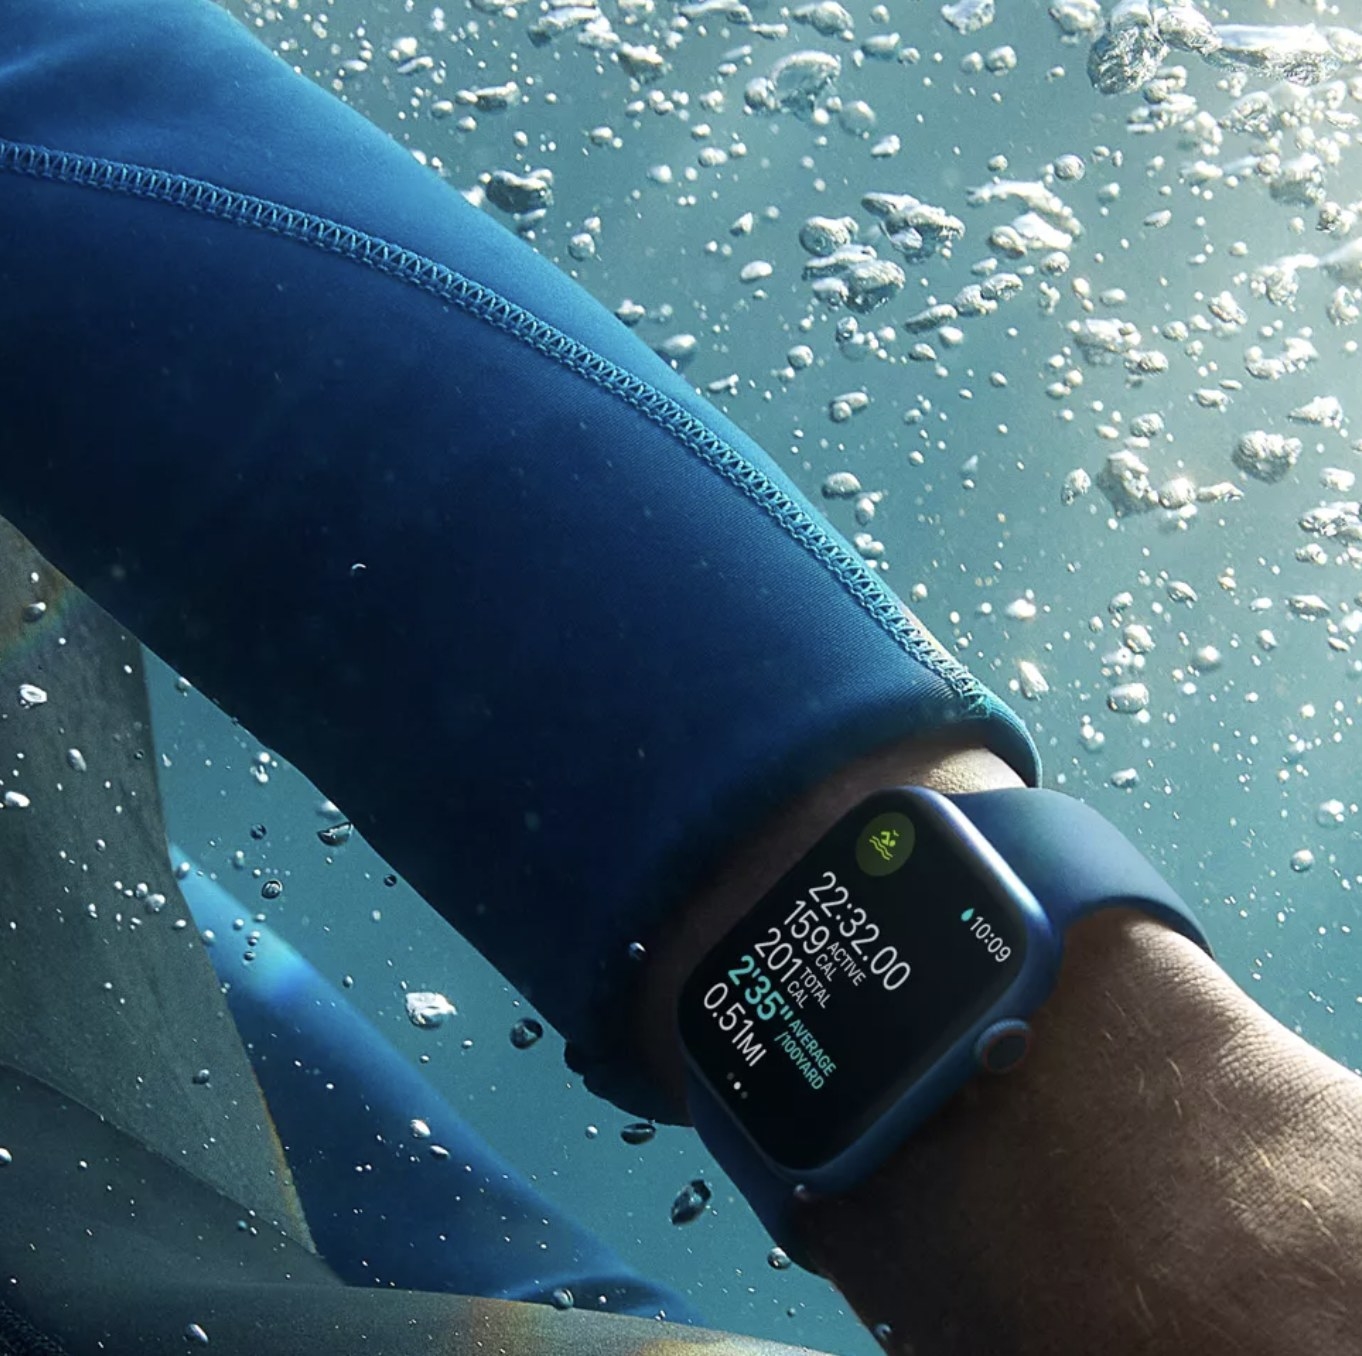 model wearing Apple Watch with blue strap while swimming in water